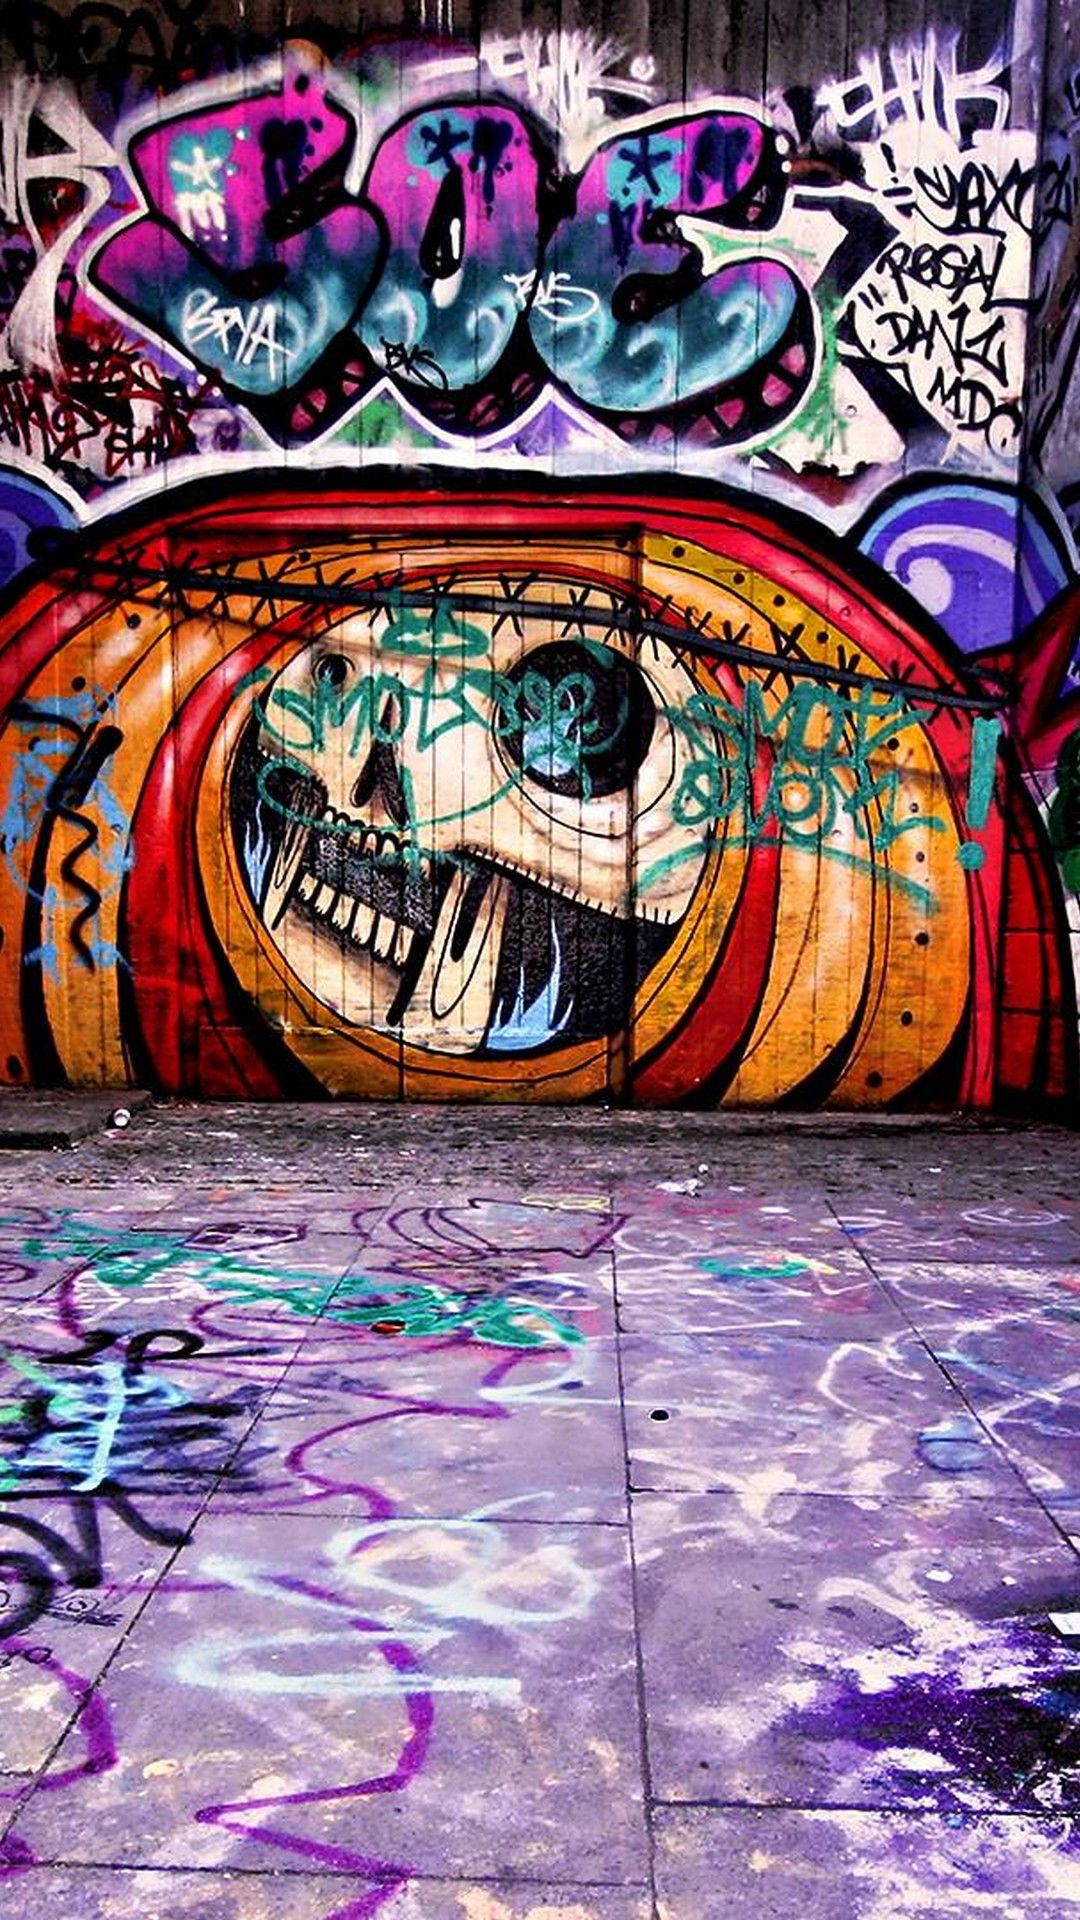 Download Graffiti wallpapers for mobile phone free Graffiti HD pictures